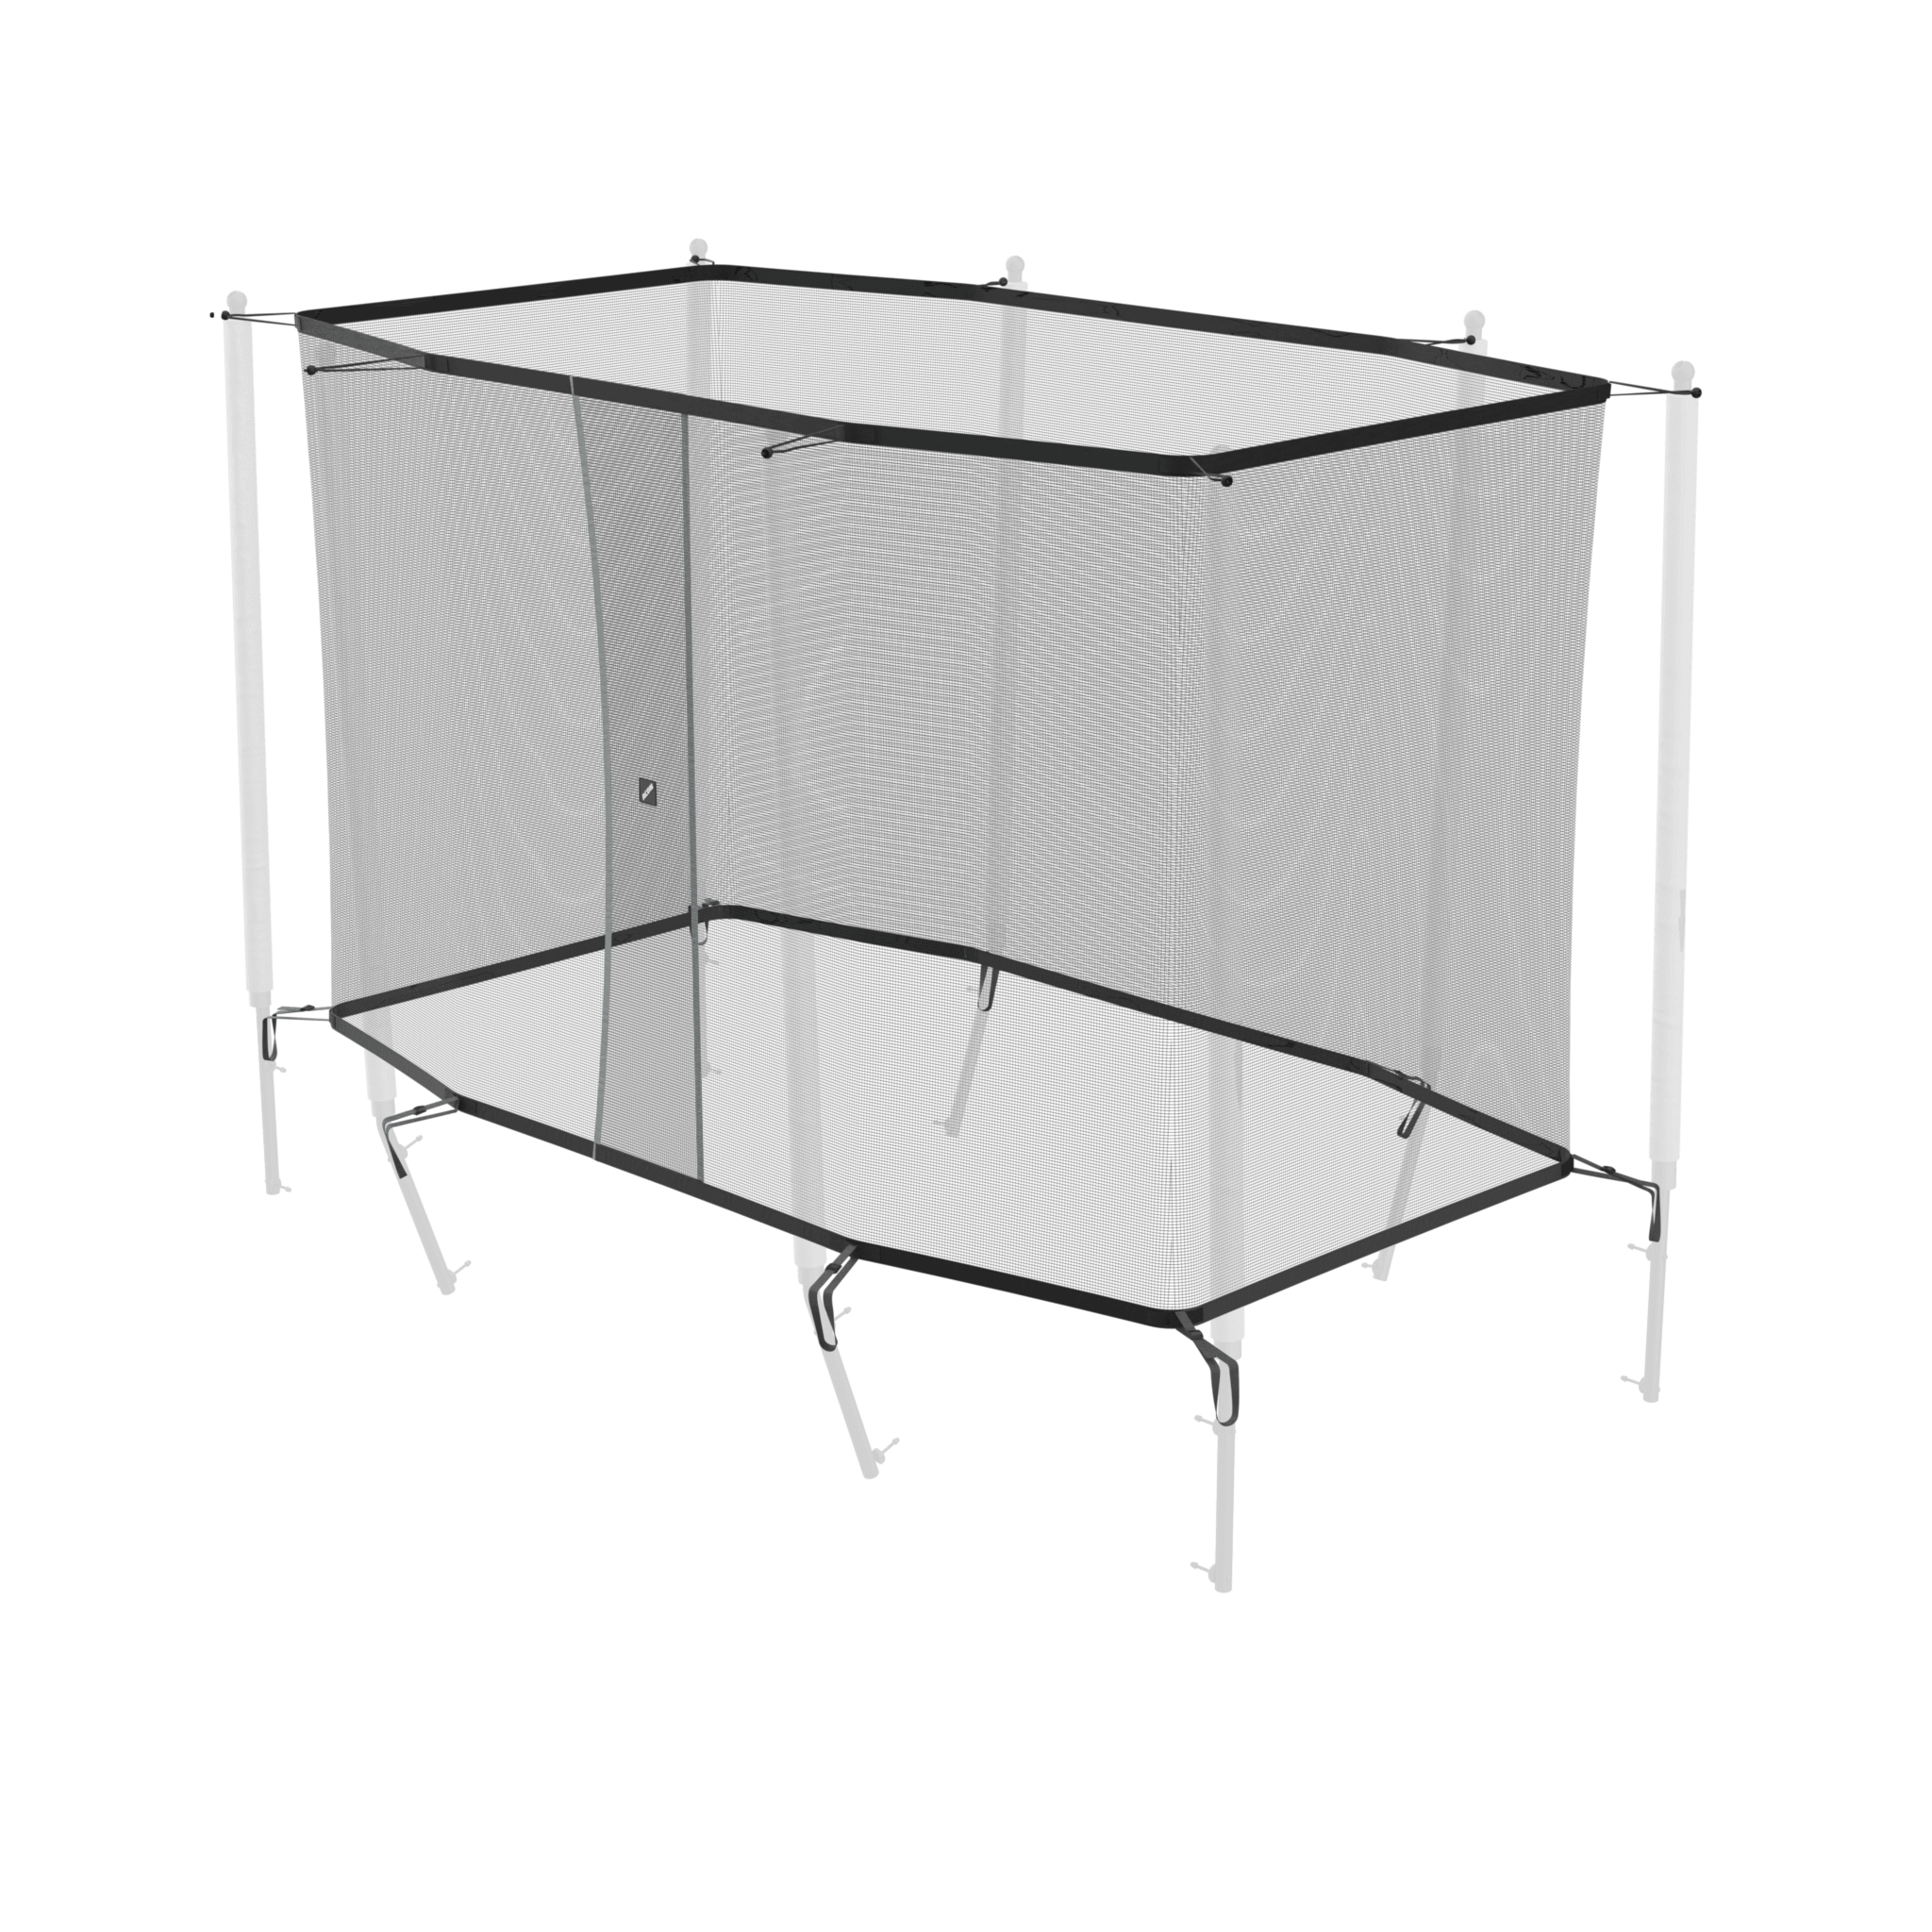 13 HD Replacement Safety Net for Rectangular Trampolines Enclosure on a white background